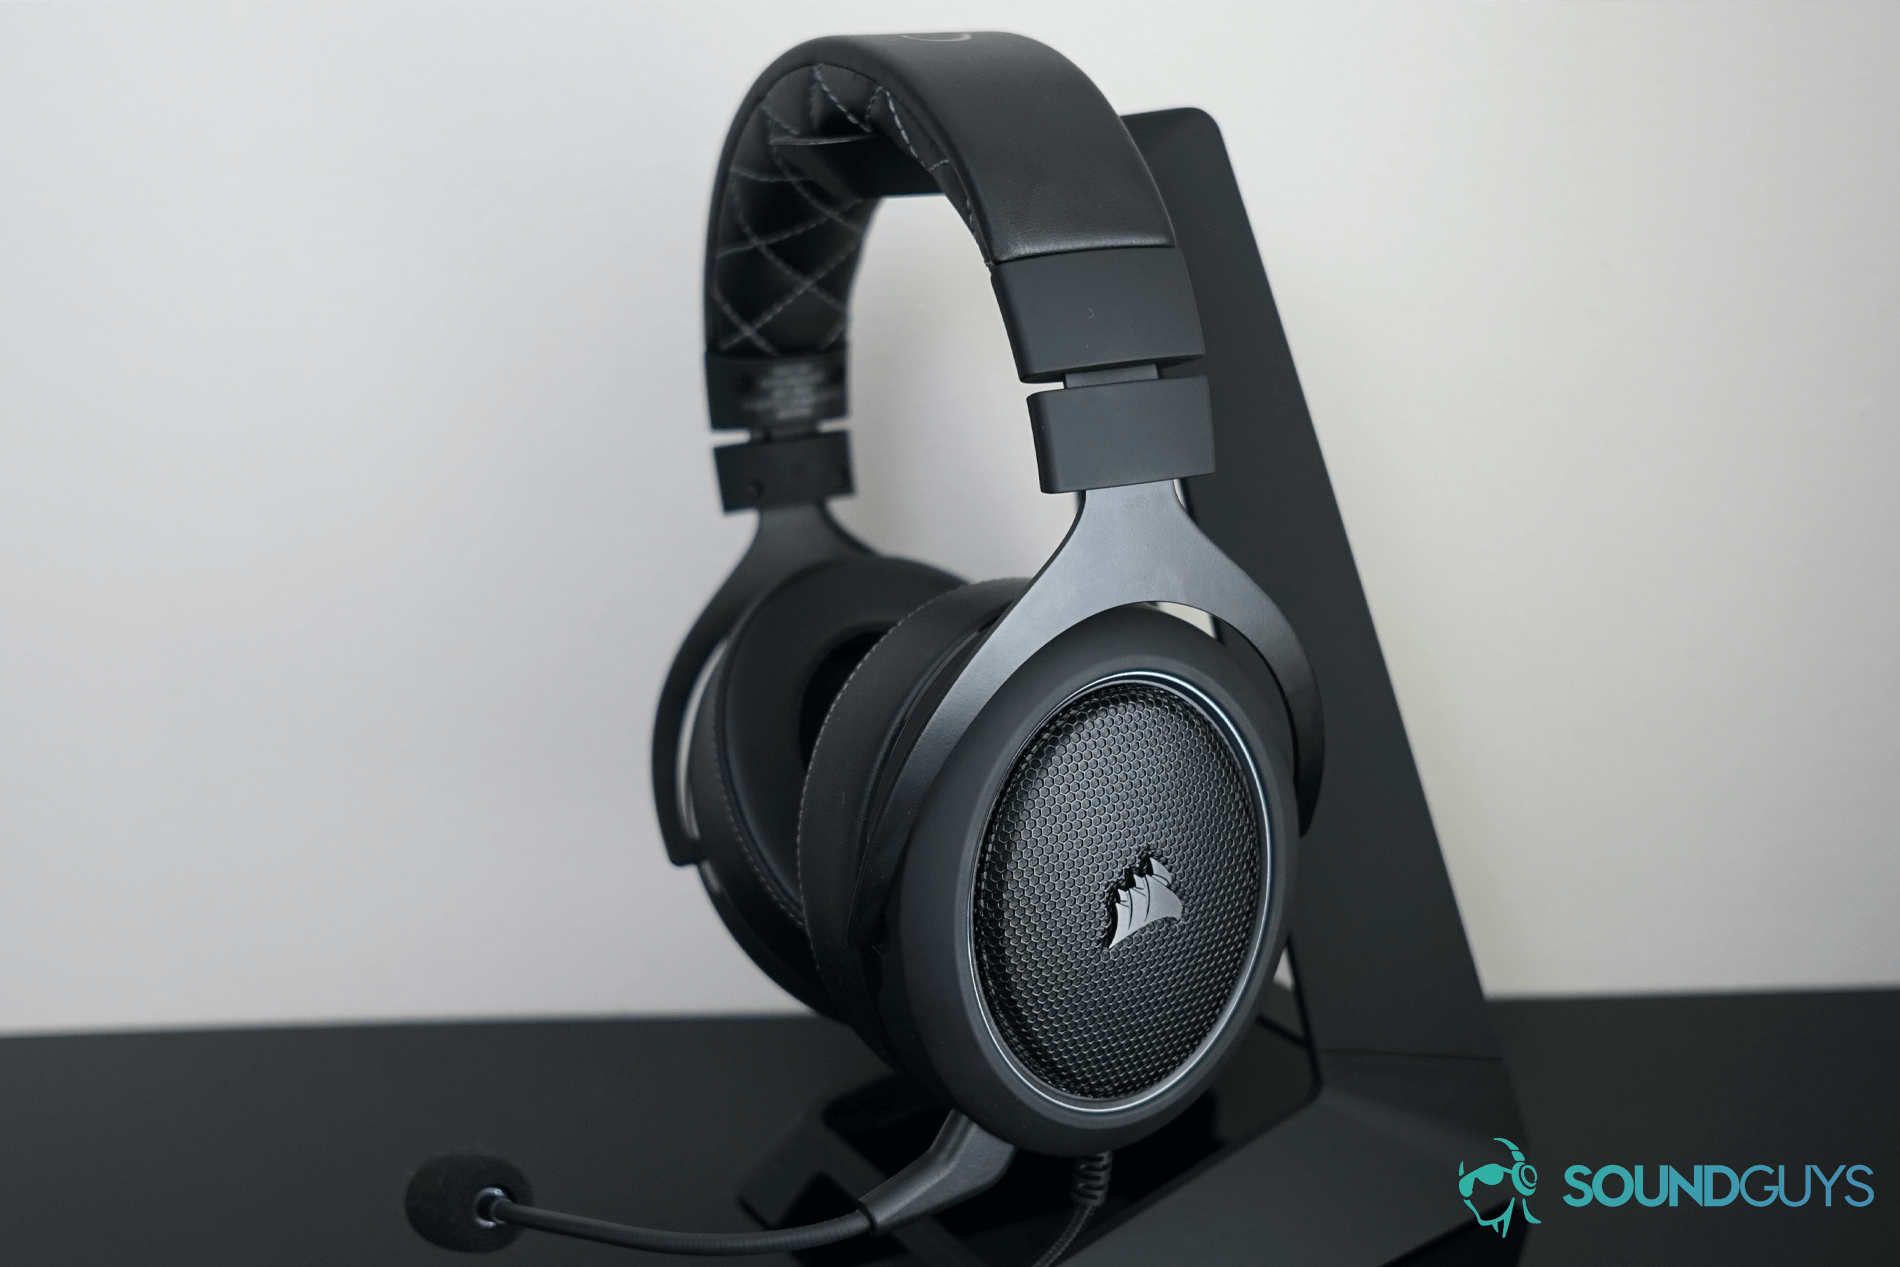 The Corsair HS60 Pro Surround gaming headset on a black headphone stand.